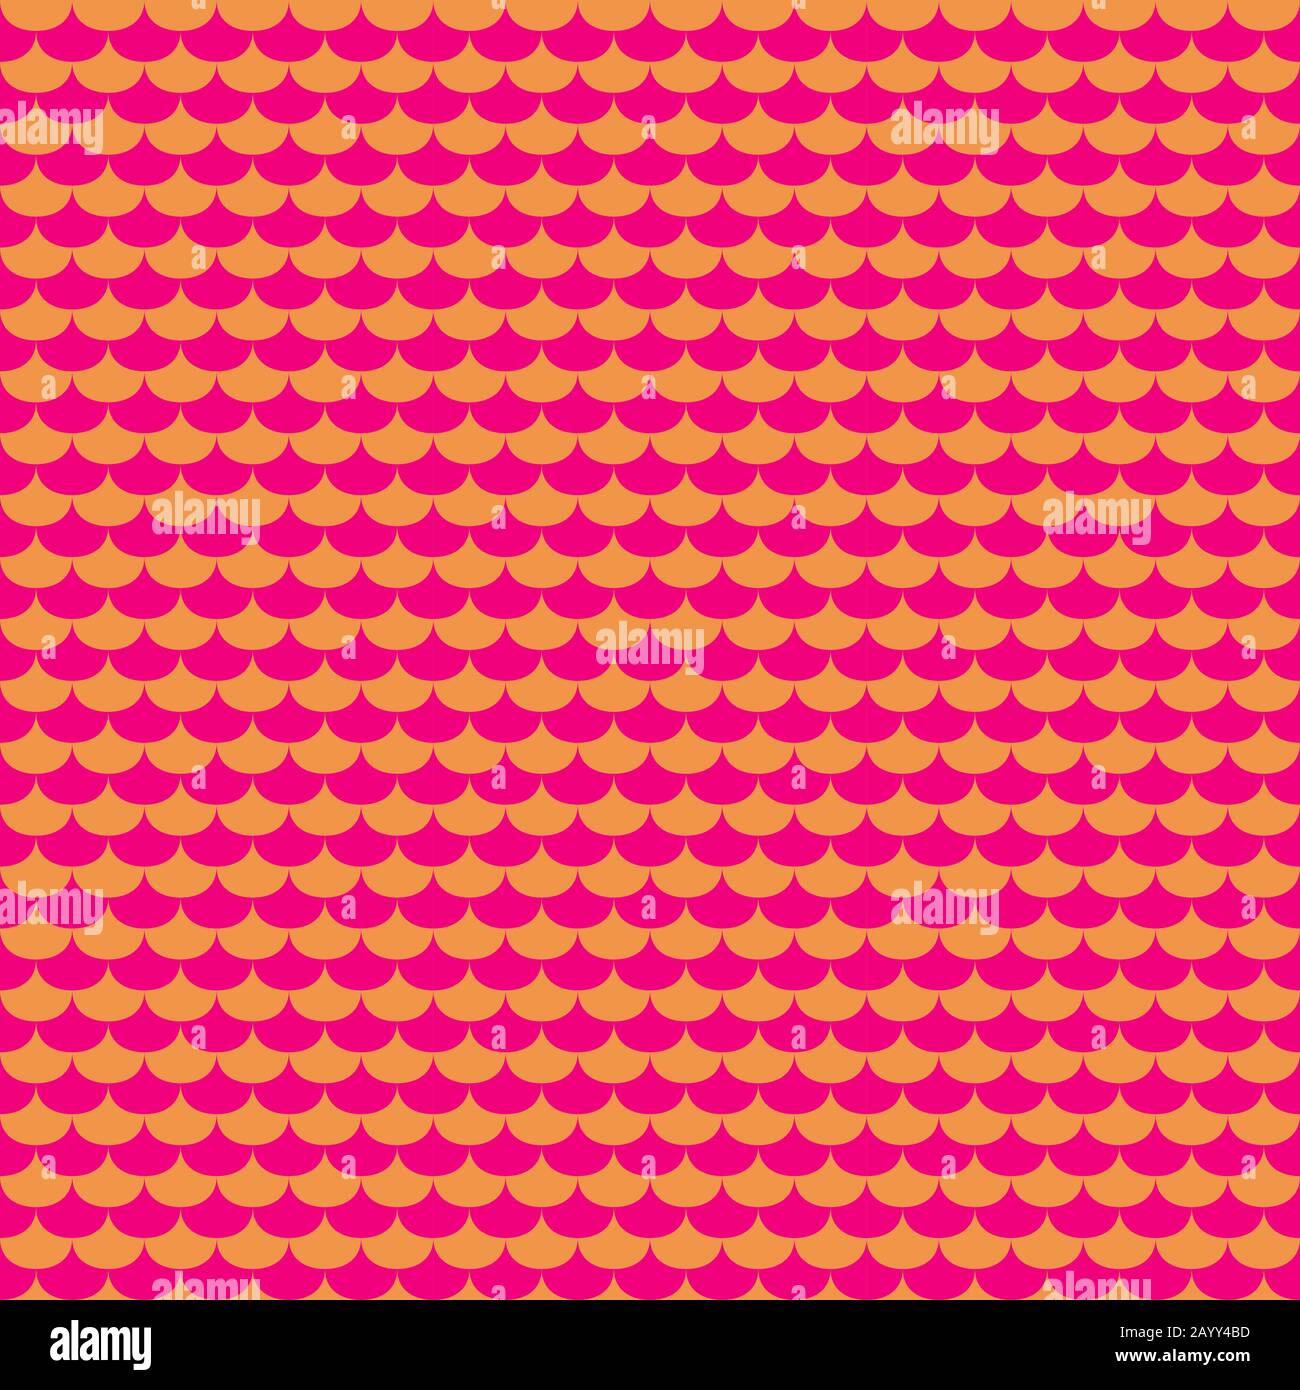 Tile-able Website Backgrounds: Spotty Pink Background (Seamless)